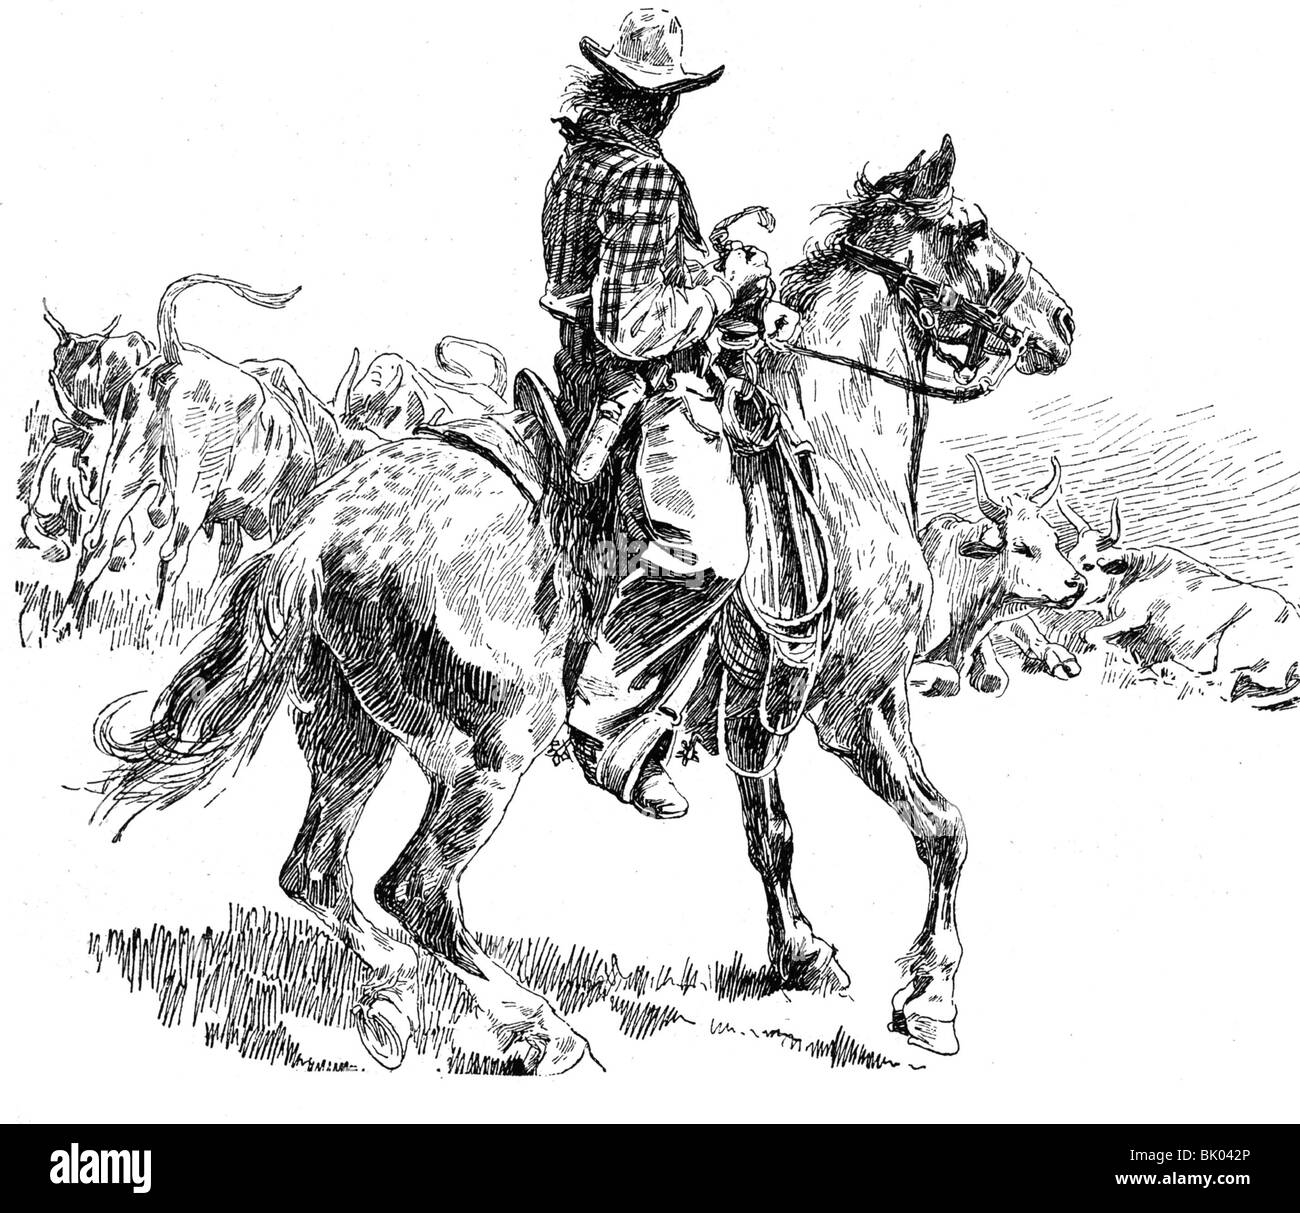 geography / travel, United States of America, people, cowboys, cattle droving, wood engraving after drawing, 1890, Stock Photo